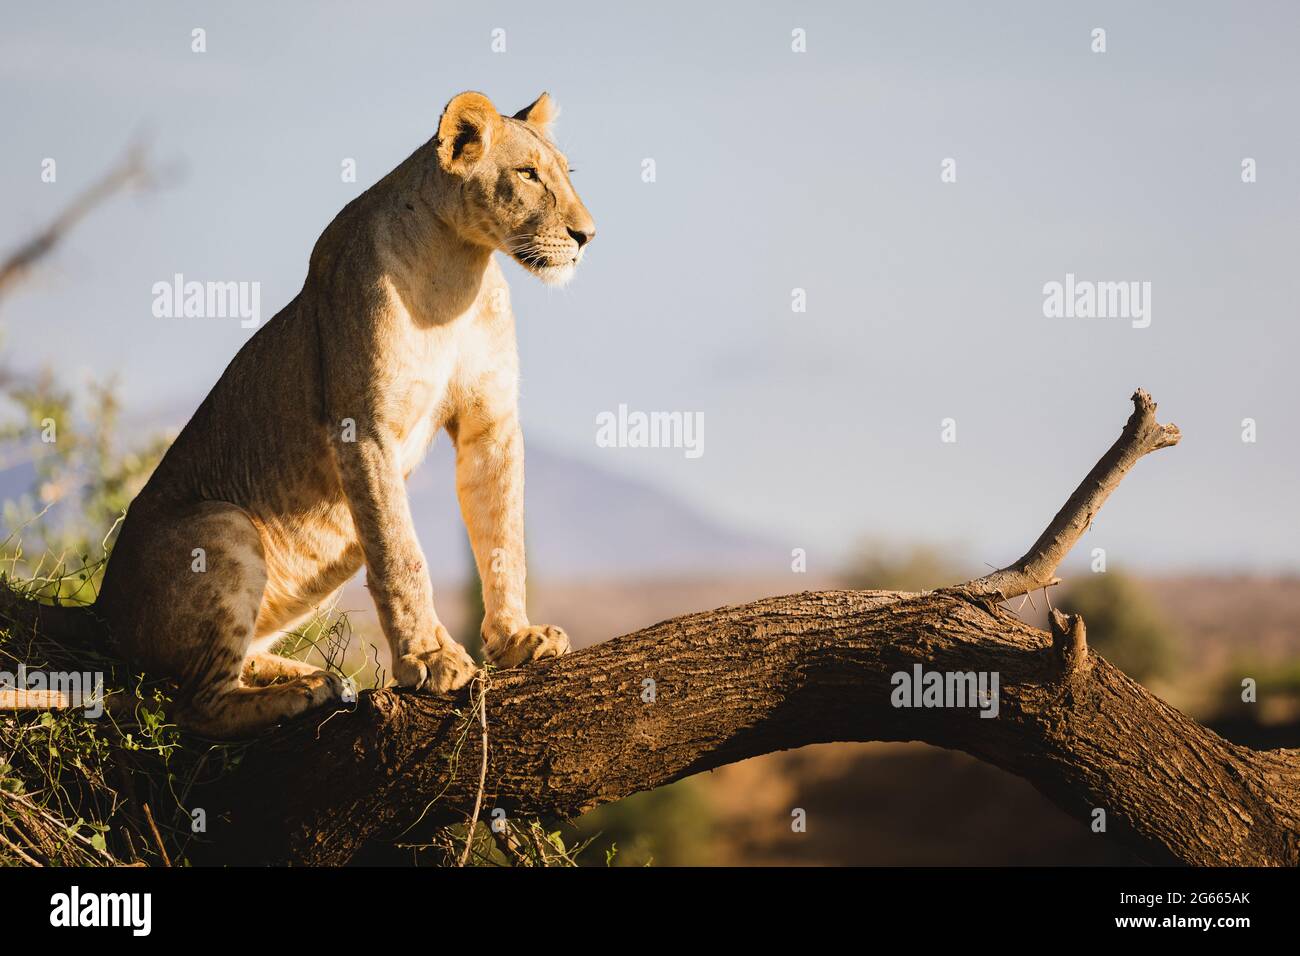 Animals in the wild - Young male lion overlooking the river banks - Samburu National Reserve, North Kenya Stock Photo